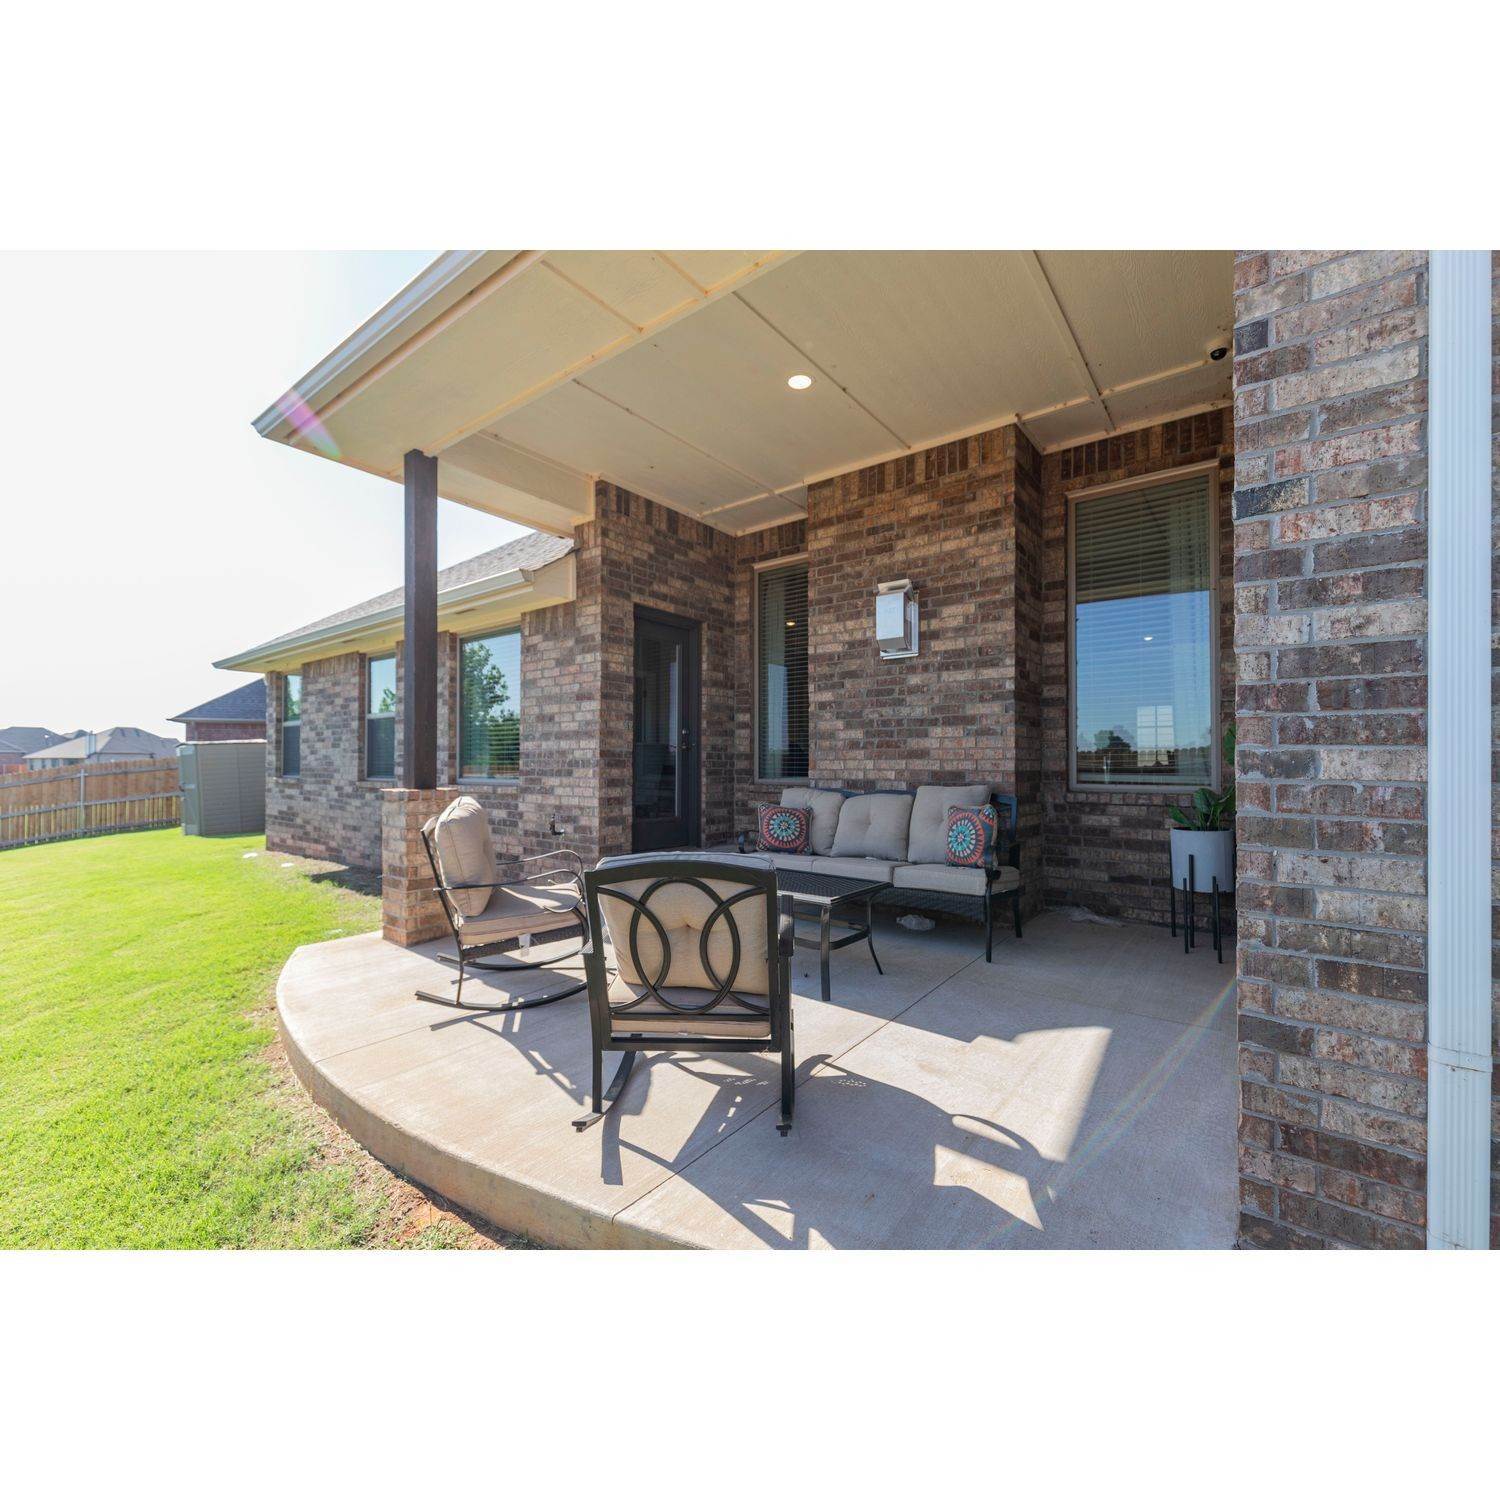 46. Canyons建於 10533 SW 52nd St, Mustang, OK 73064